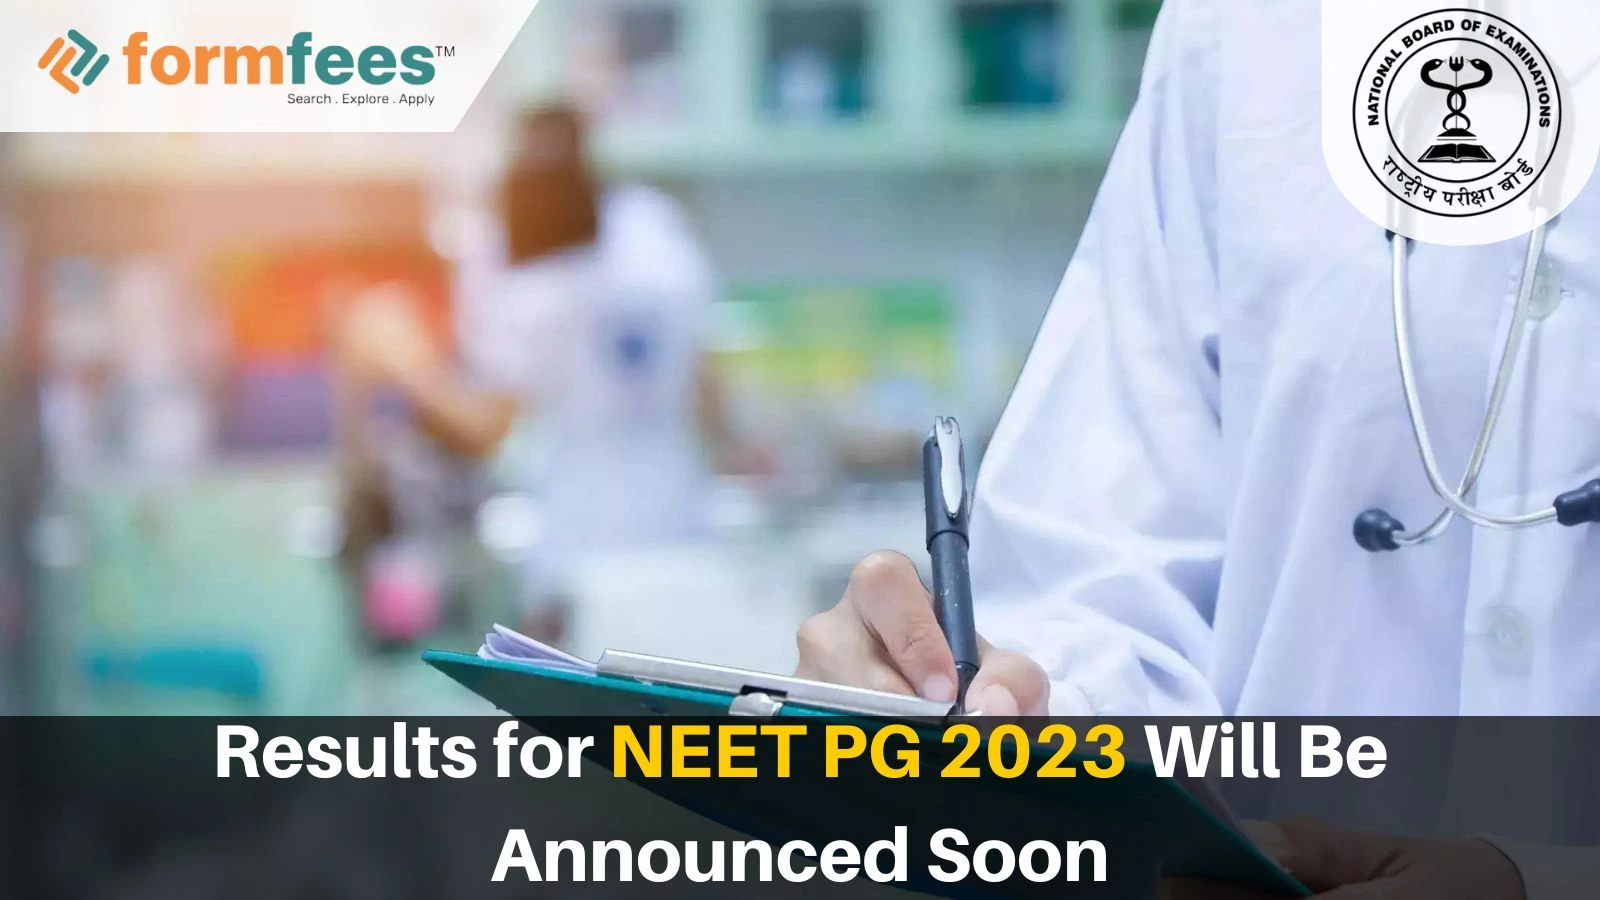 Results for NEET PG 2023 Will Be Announced Soon